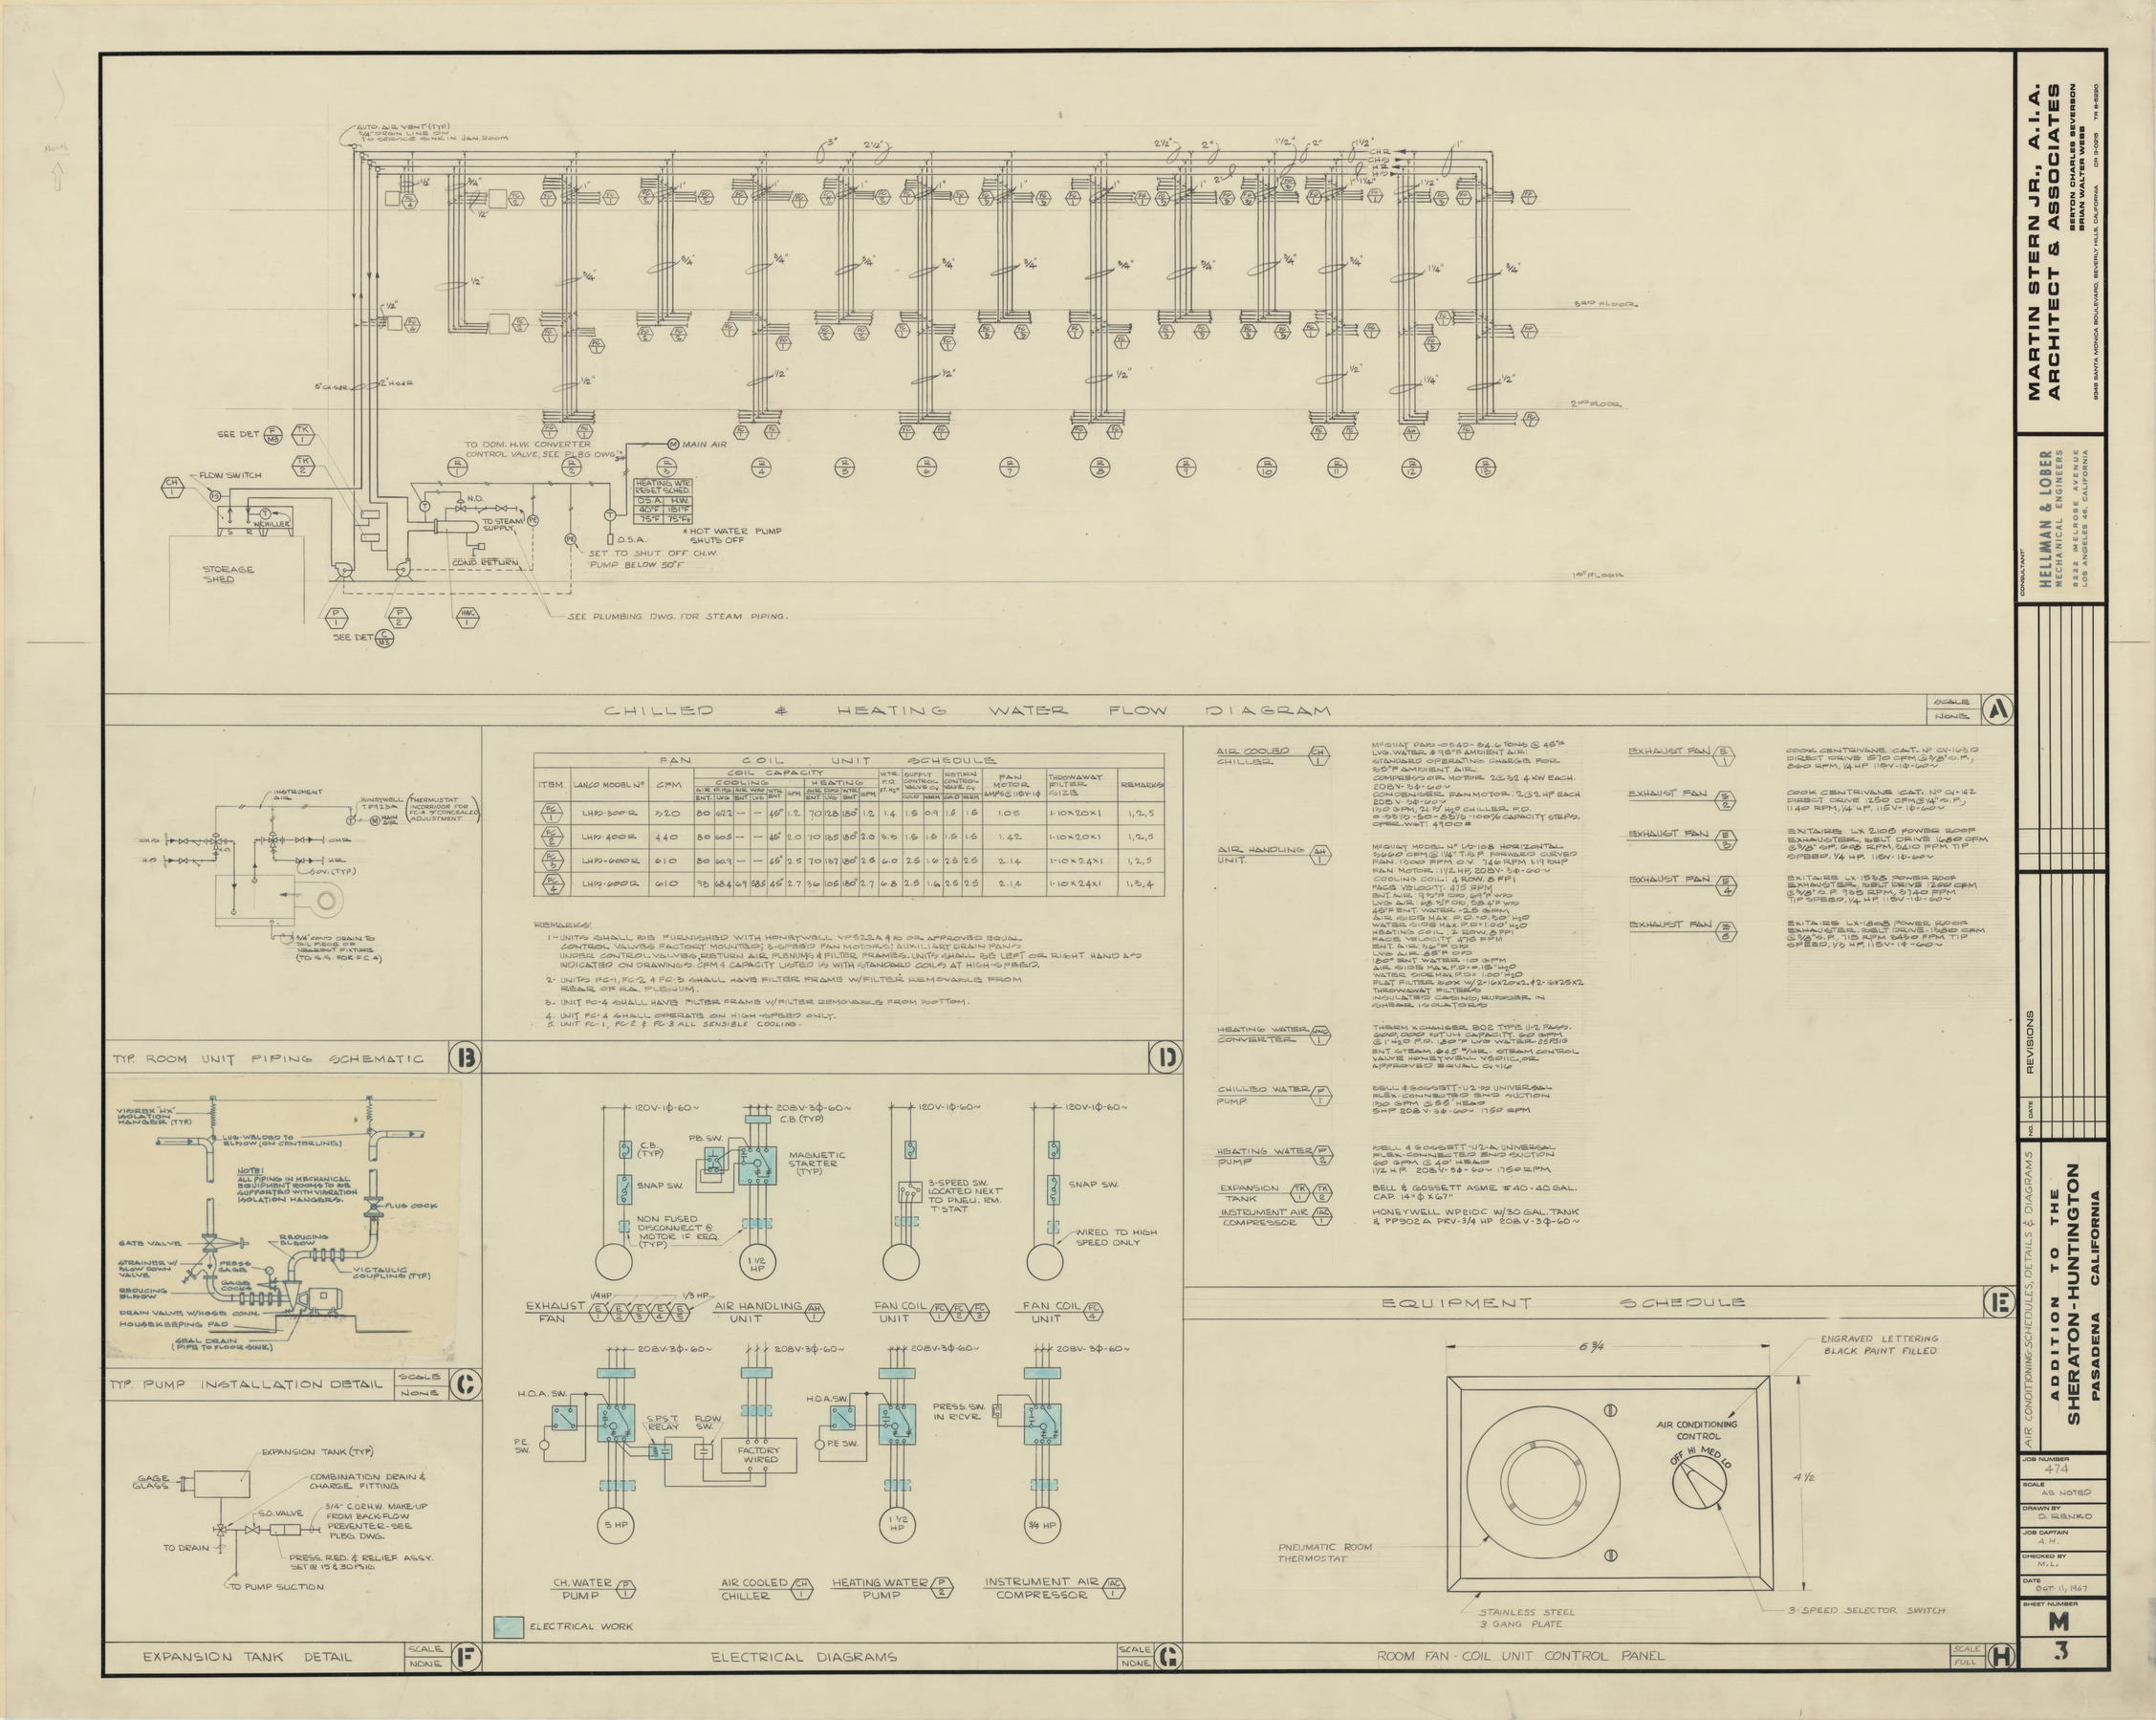 Huntington addition, architectural, electrical, mechanical, and plumbing: architectural drawings, image 023